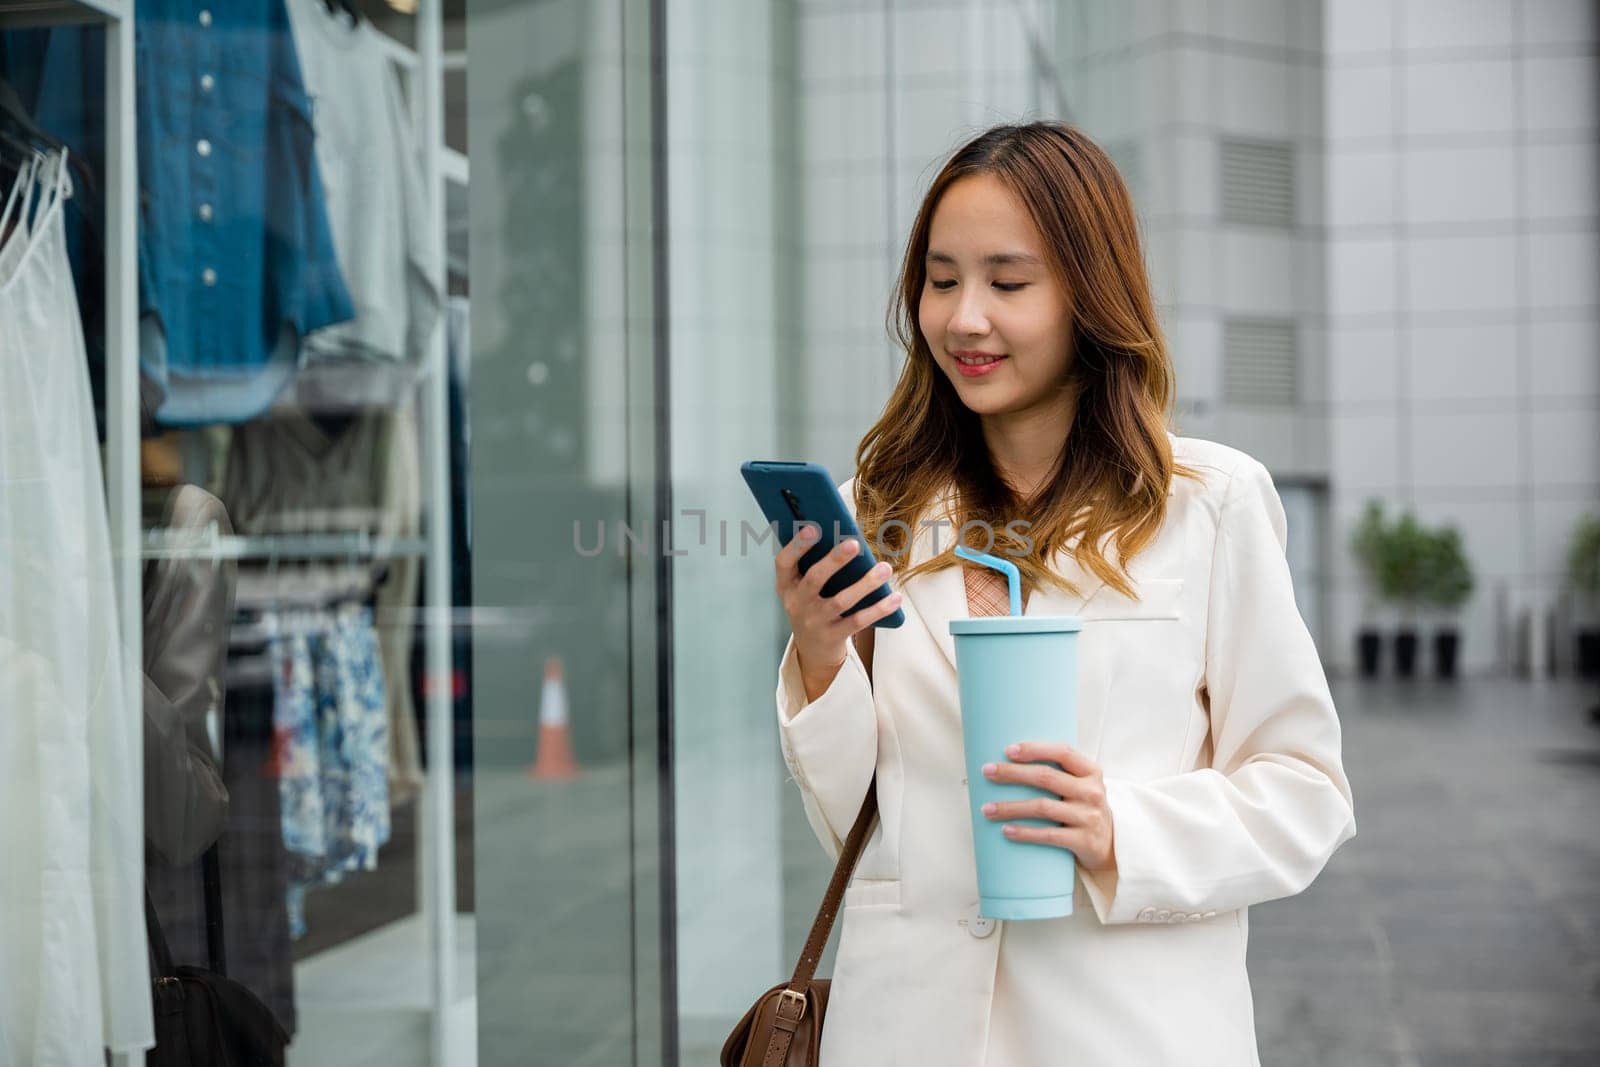 Asian woman enjoying her coffee and digital communication ,holding a tumbler mug and smartphone in front of a store window. Modern lifestyle and convenience is her style.